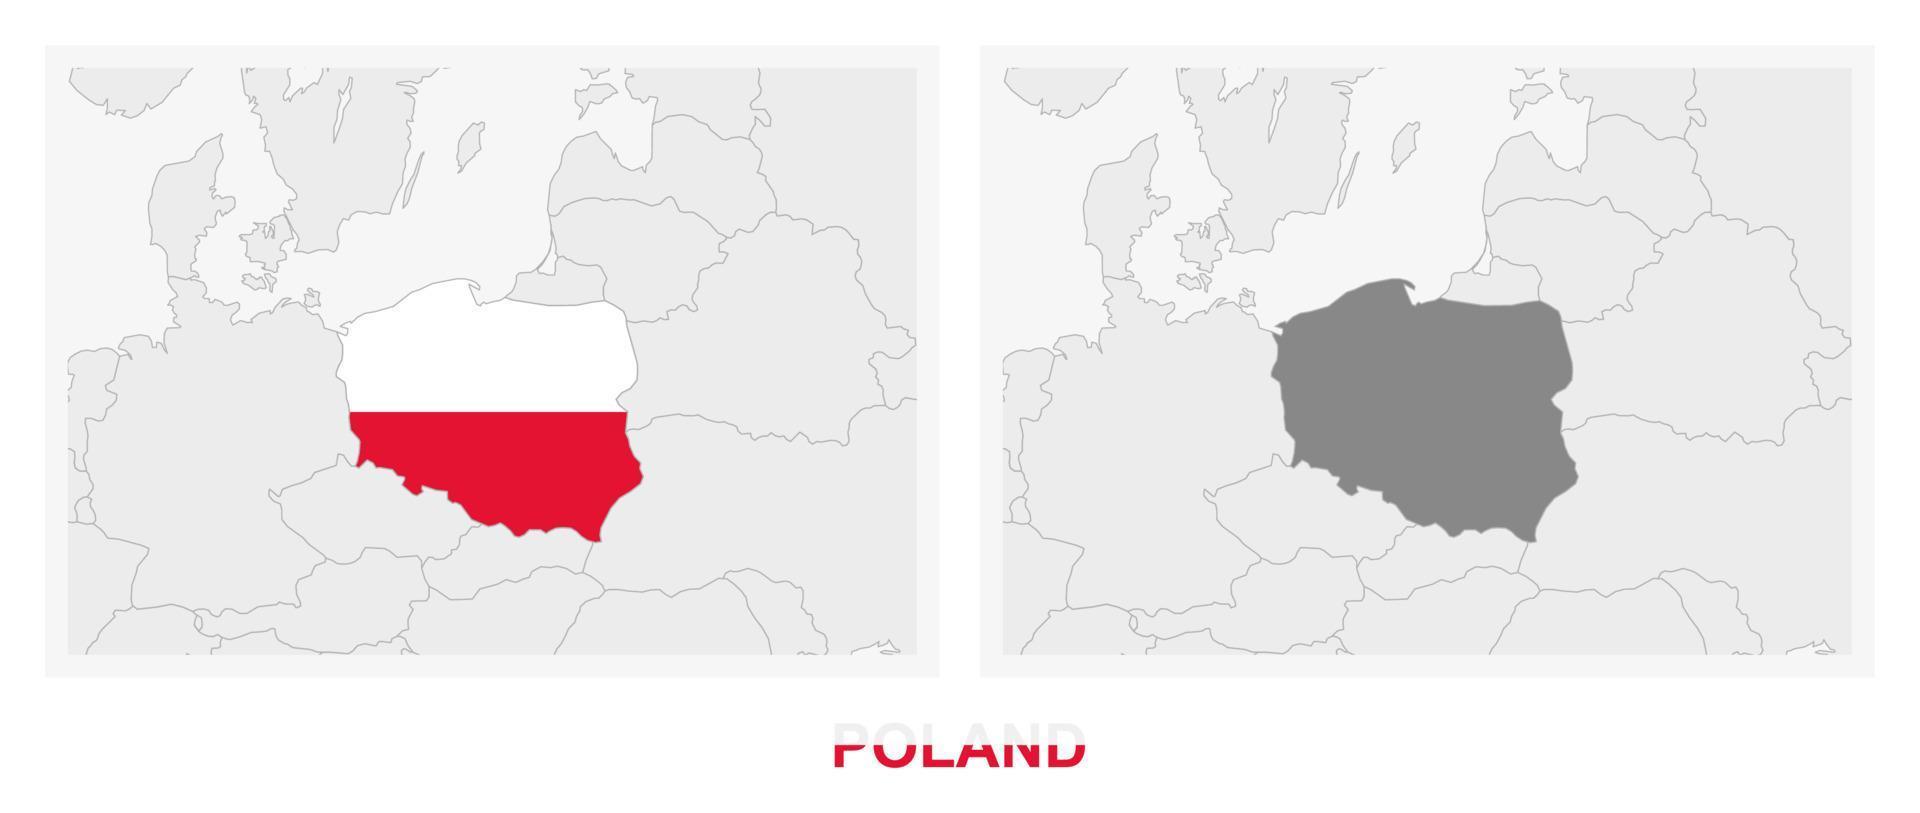 Two versions of the map of Poland, with the flag of Poland and highlighted in dark grey. vector